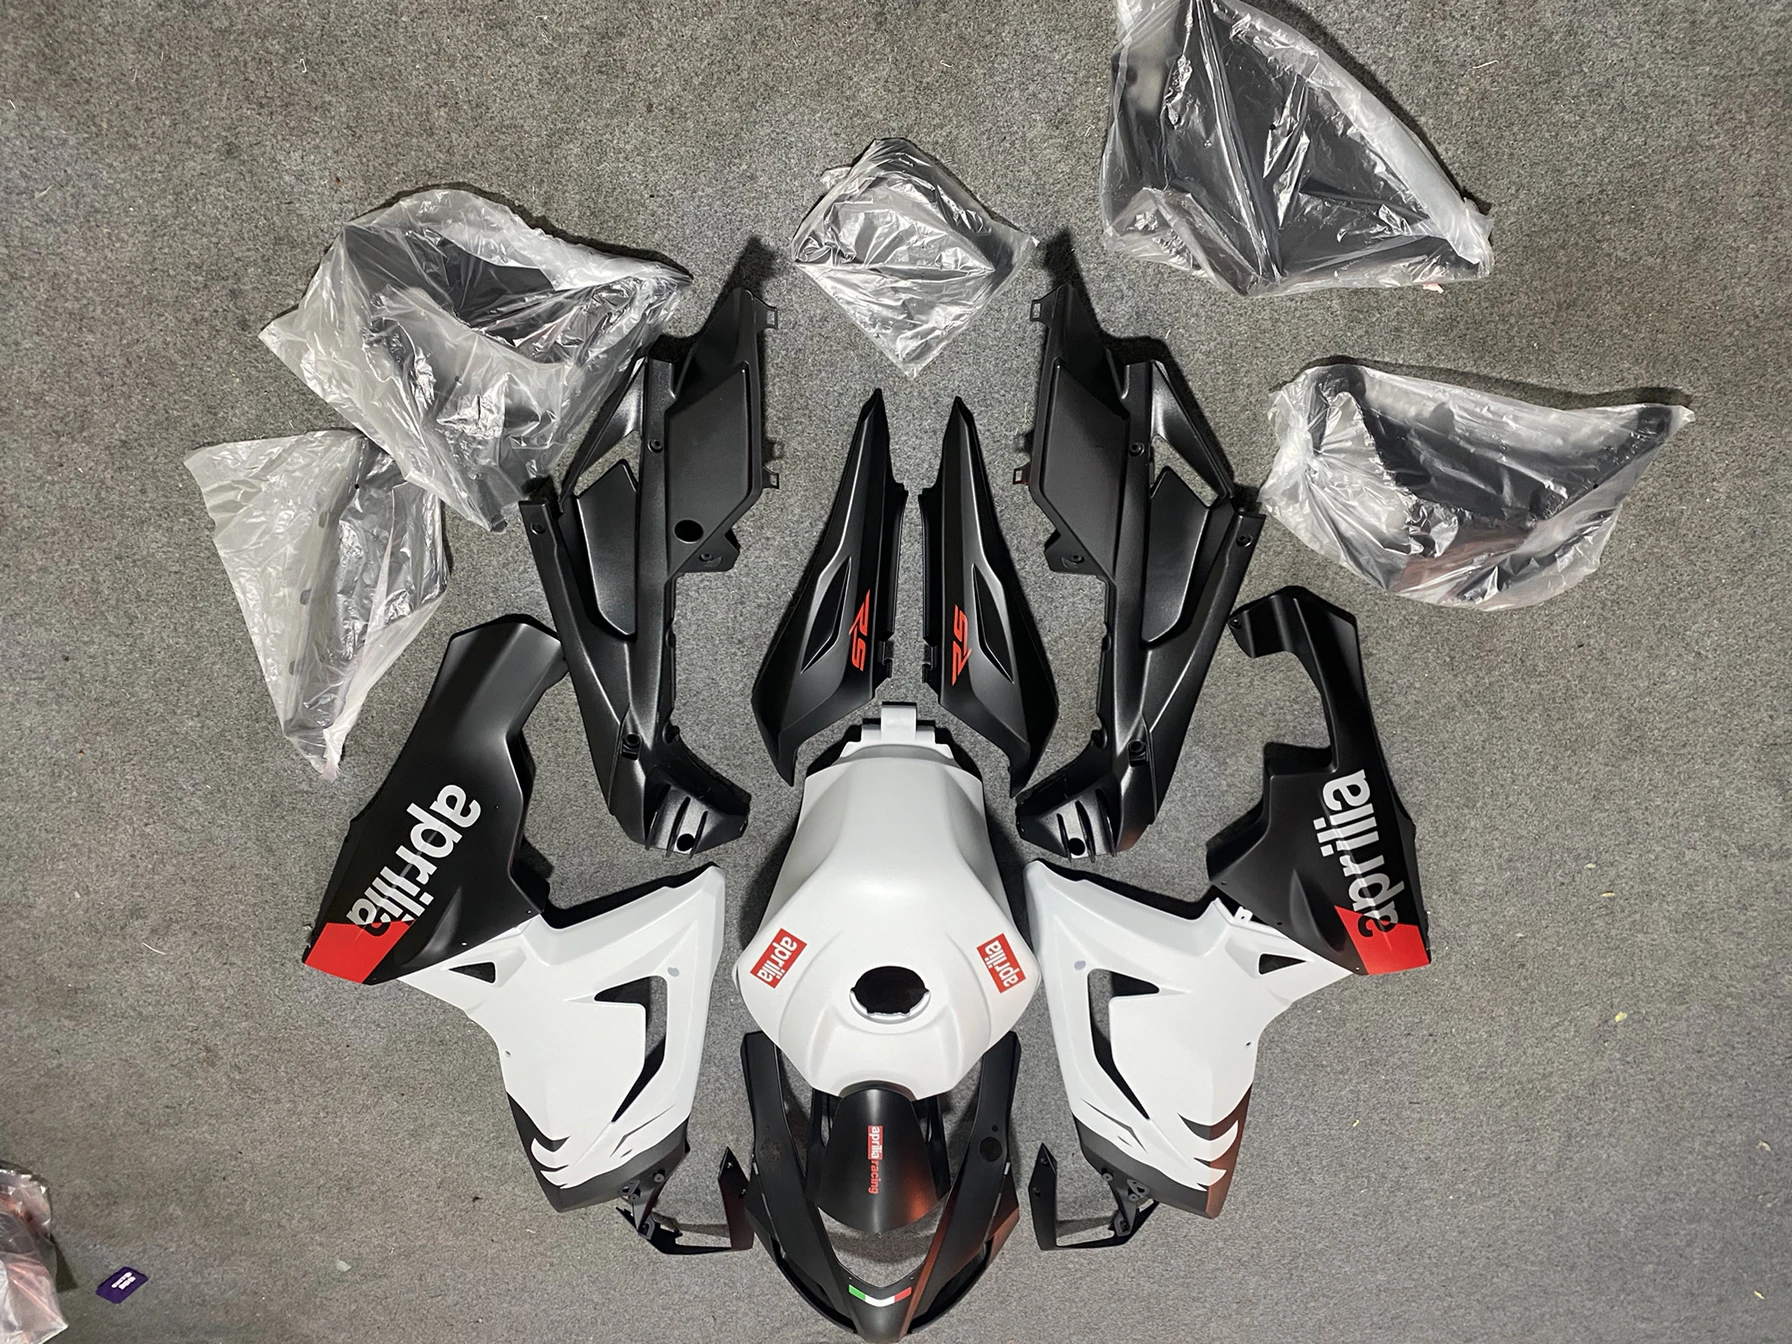 

Injection mold New Fairings Kit Fit For Aprilia RS4 50 125 RS125 2006 2007 2008 2009 2010 2011 RS 06 07 08 09 10 11 Bodywork Set